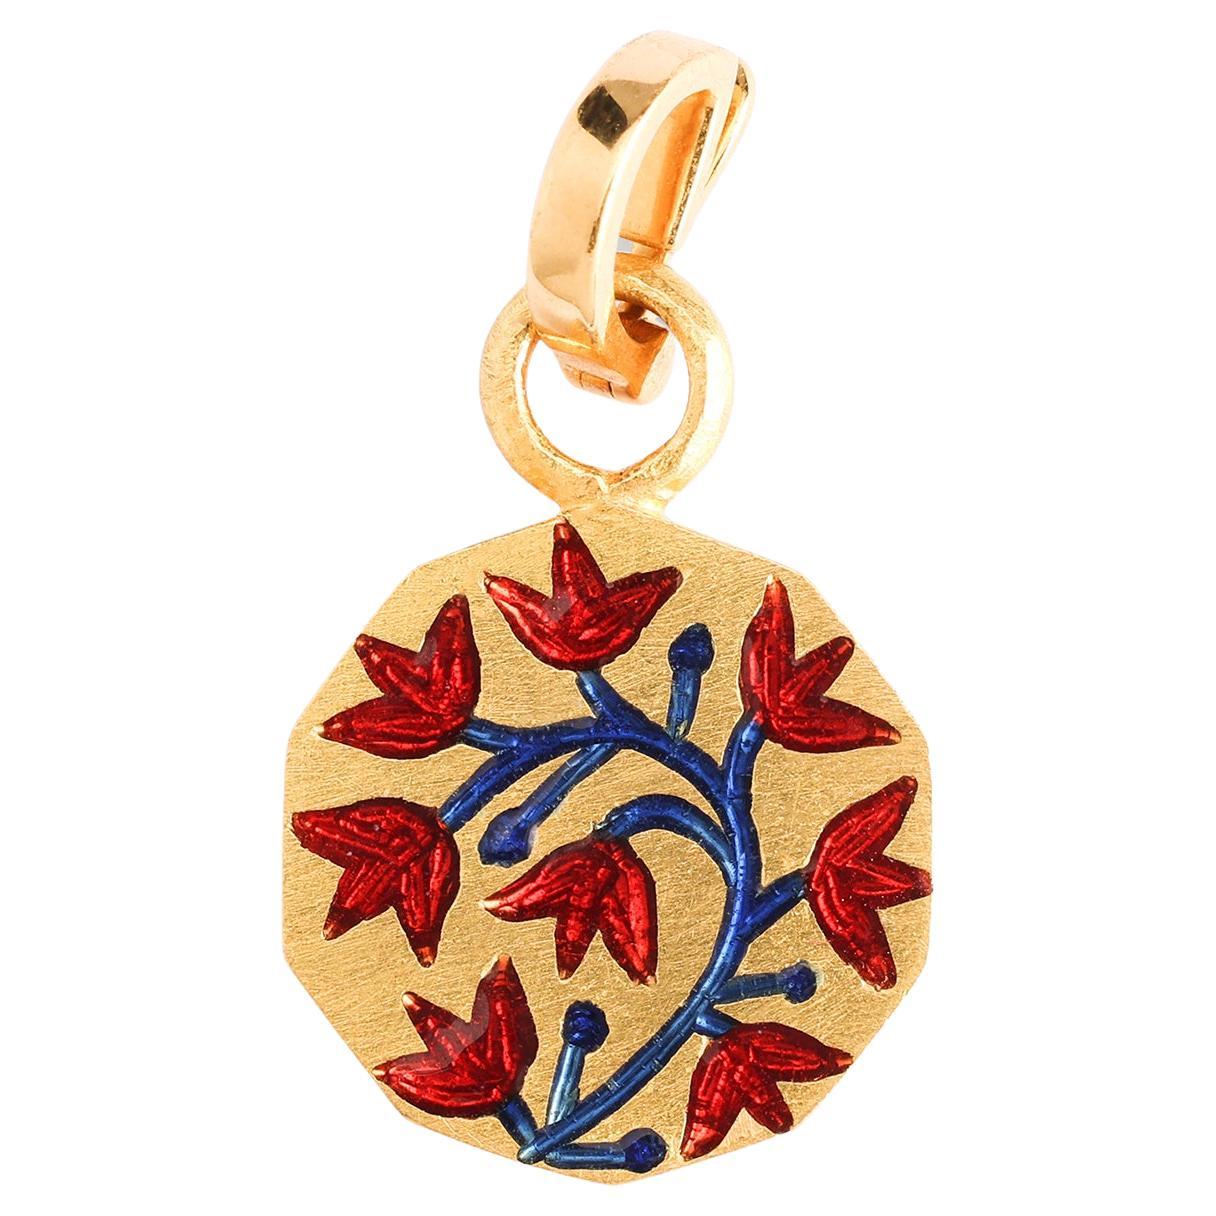 This 'Rosebush' Girih Reversible Initial Mohur Charm is a modern heirloom that encapsulates the power of self-expression, a tangible representation of your individuality, and a precious keepsake to be cherished for generations to come. 

From